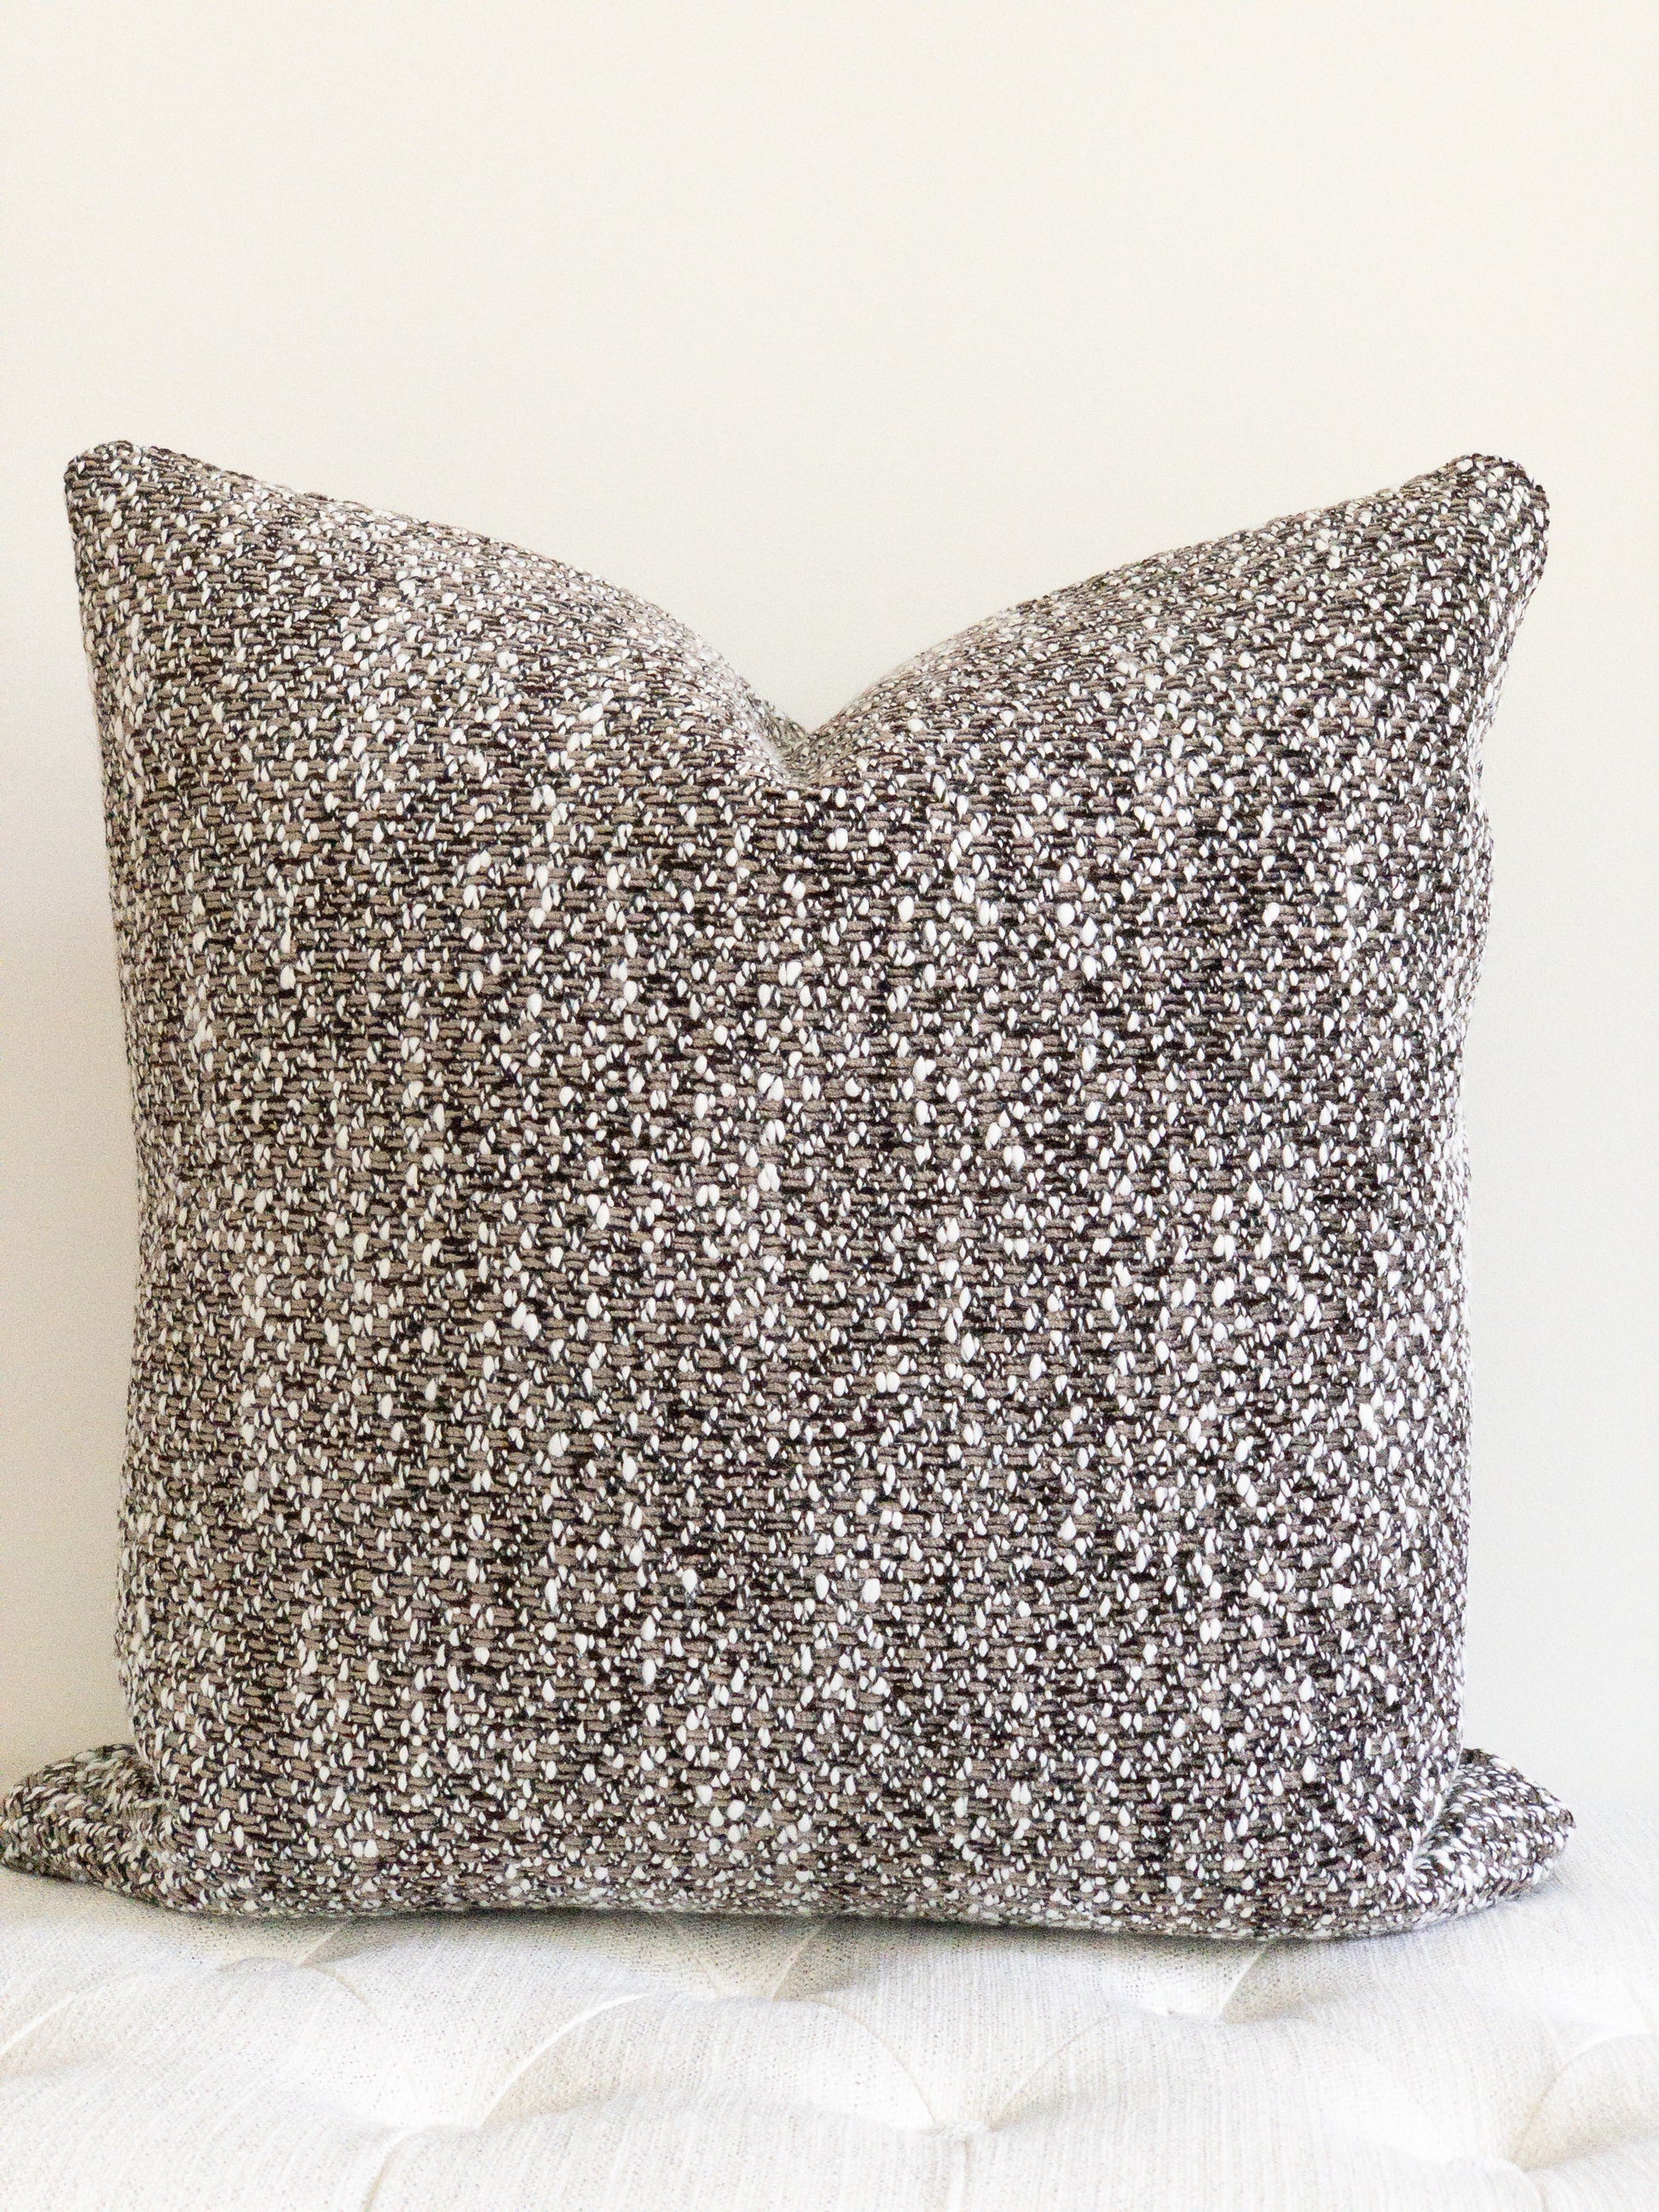 Brown and white boucle designer accent pillow square